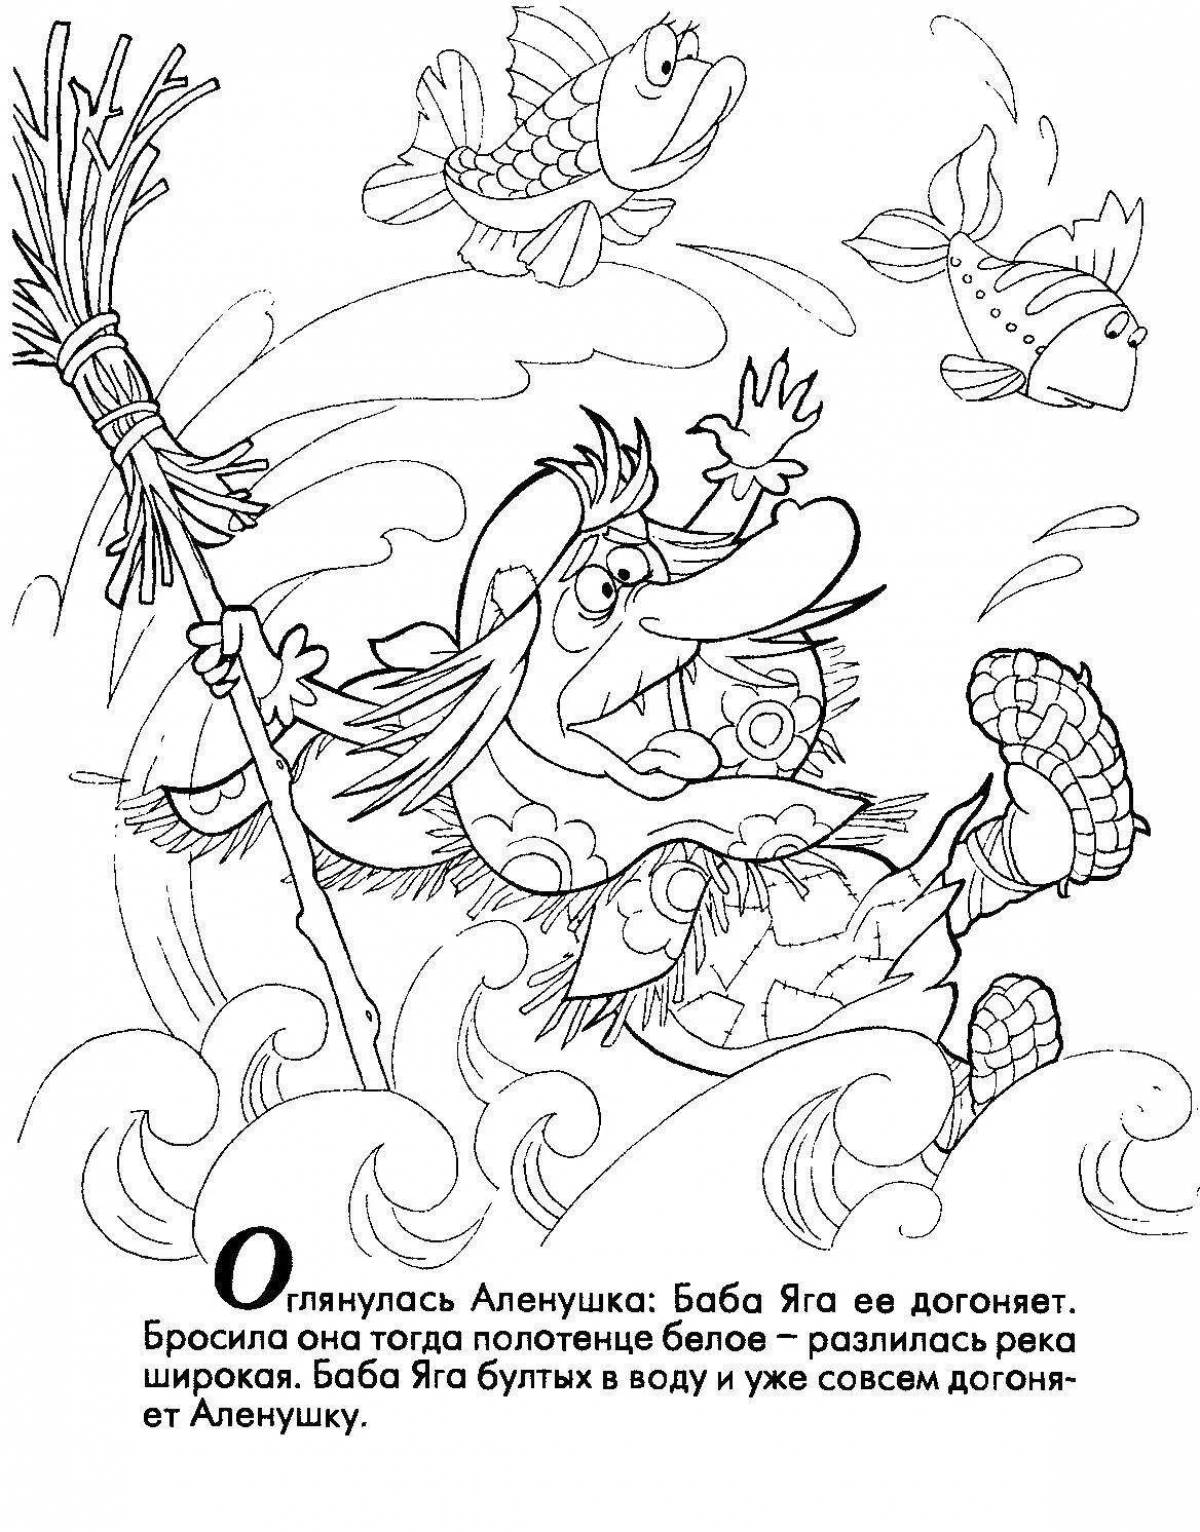 Delightful coloring book based on Pushkin's fairy tales